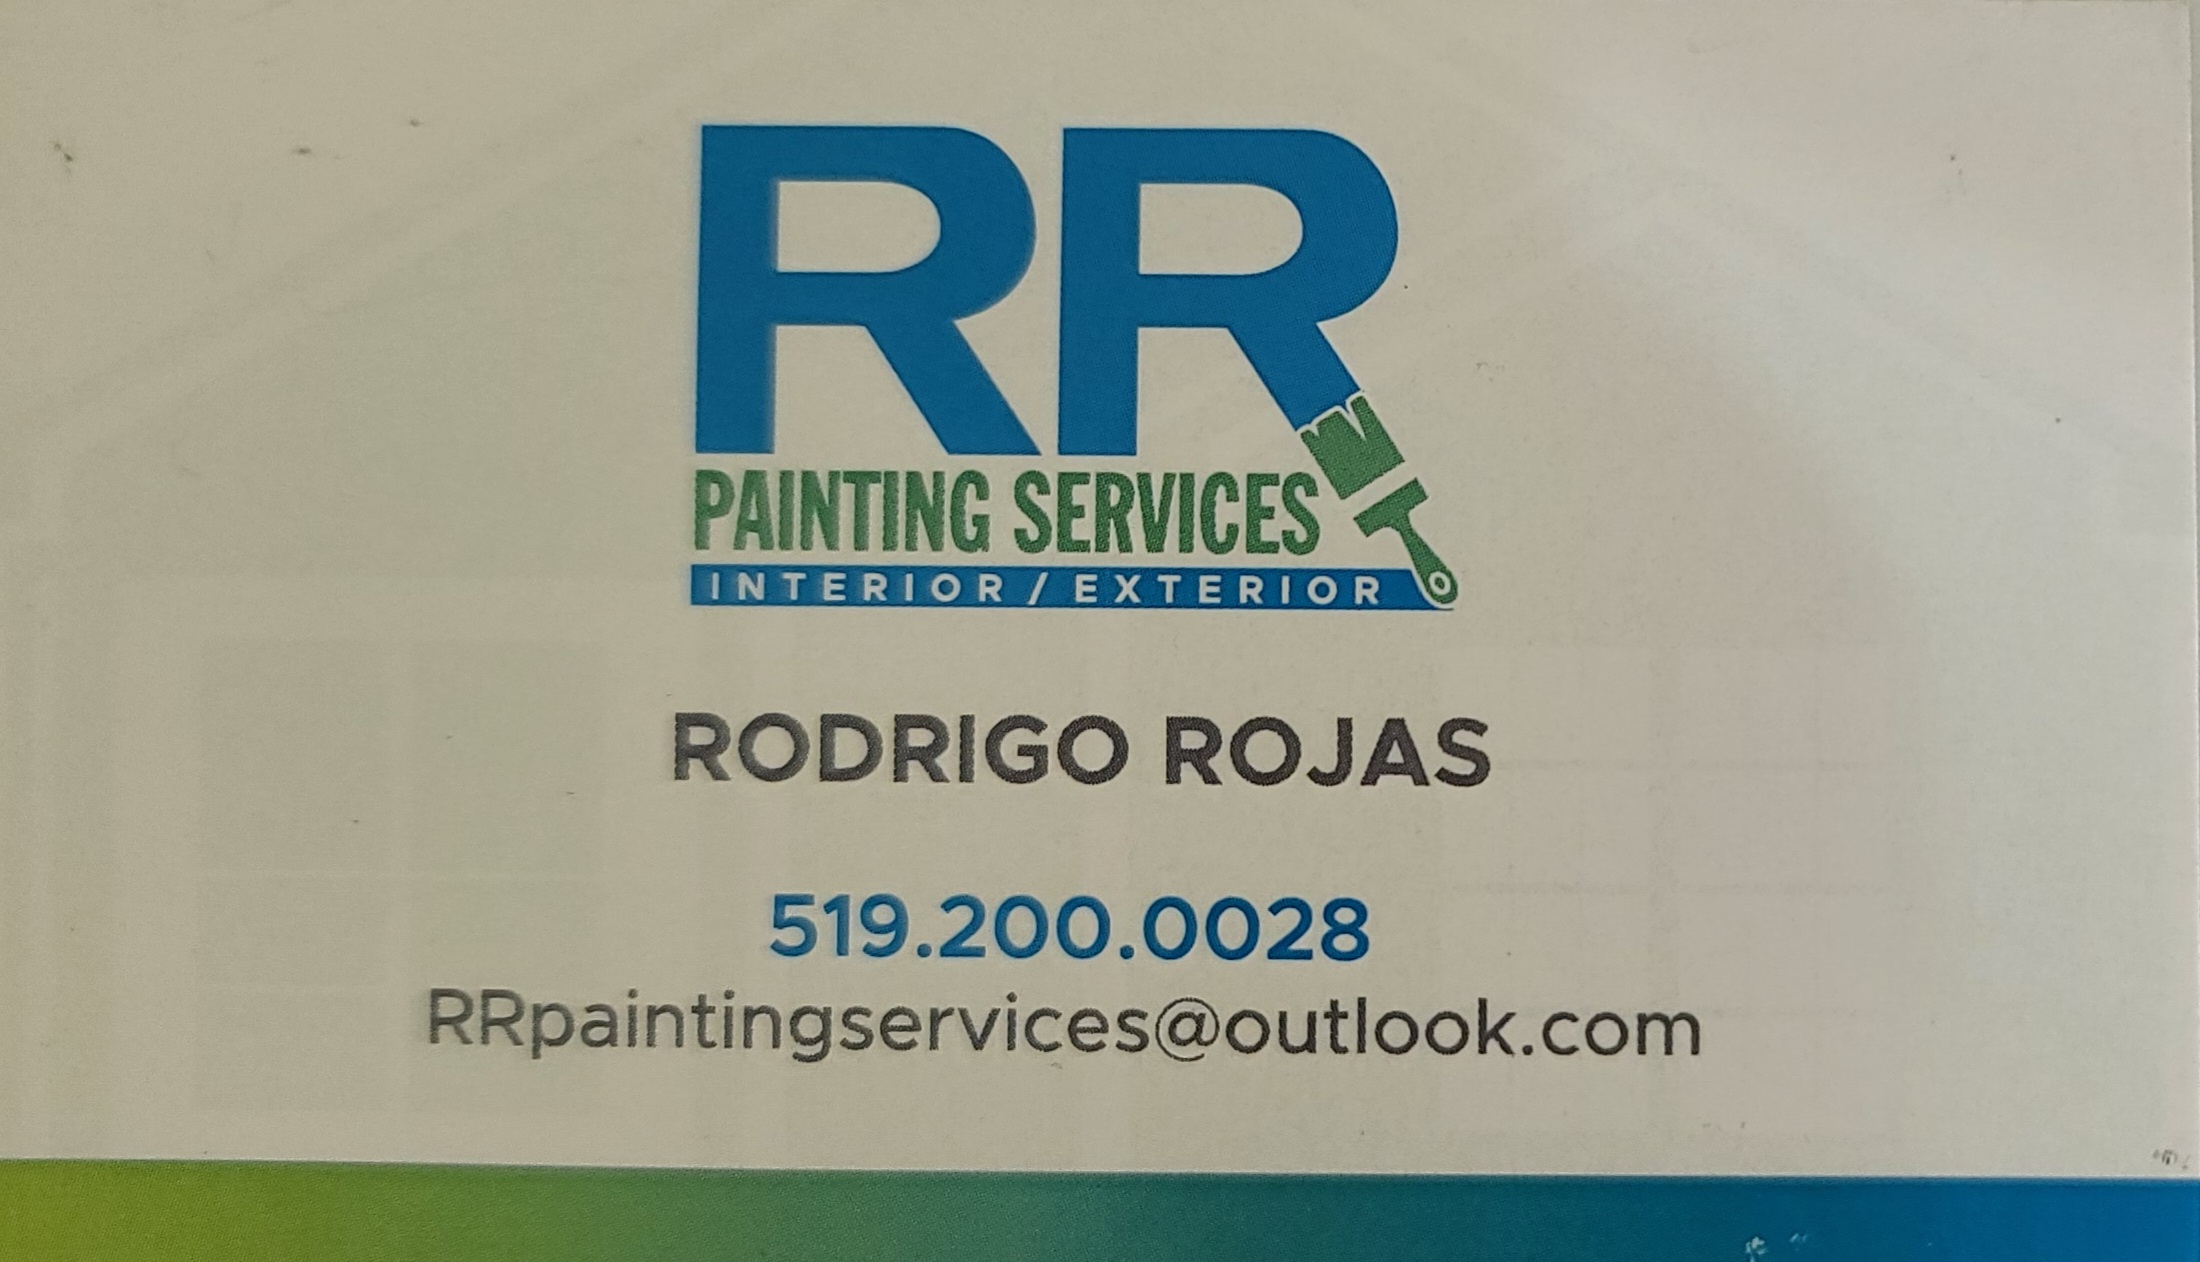 RR Painting Services